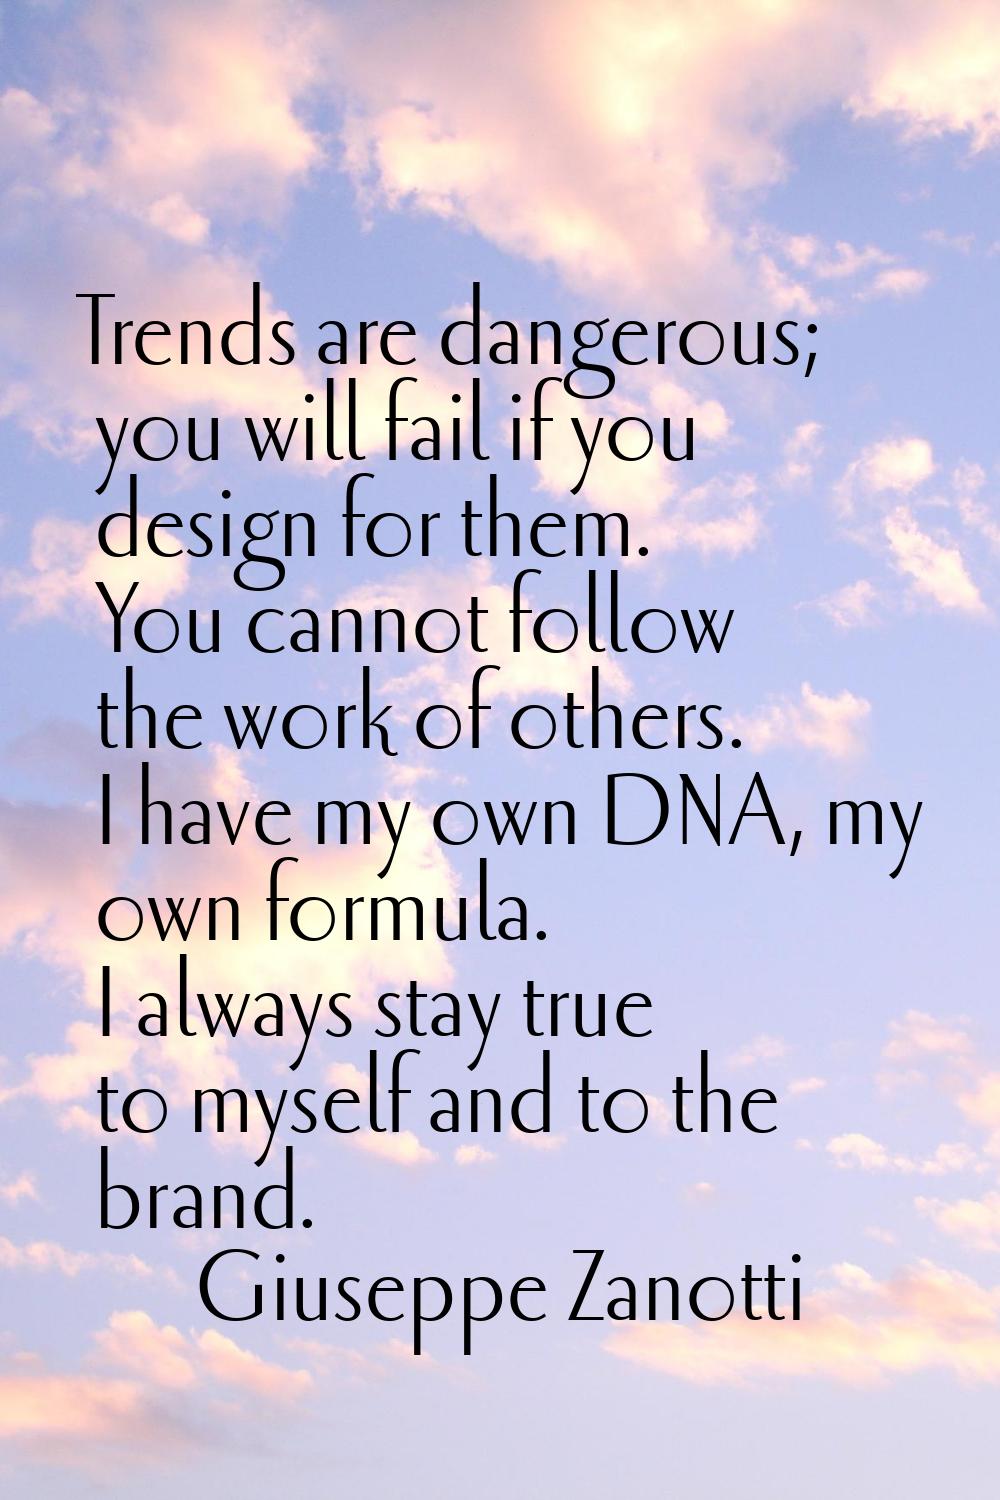 Trends are dangerous; you will fail if you design for them. You cannot follow the work of others. I